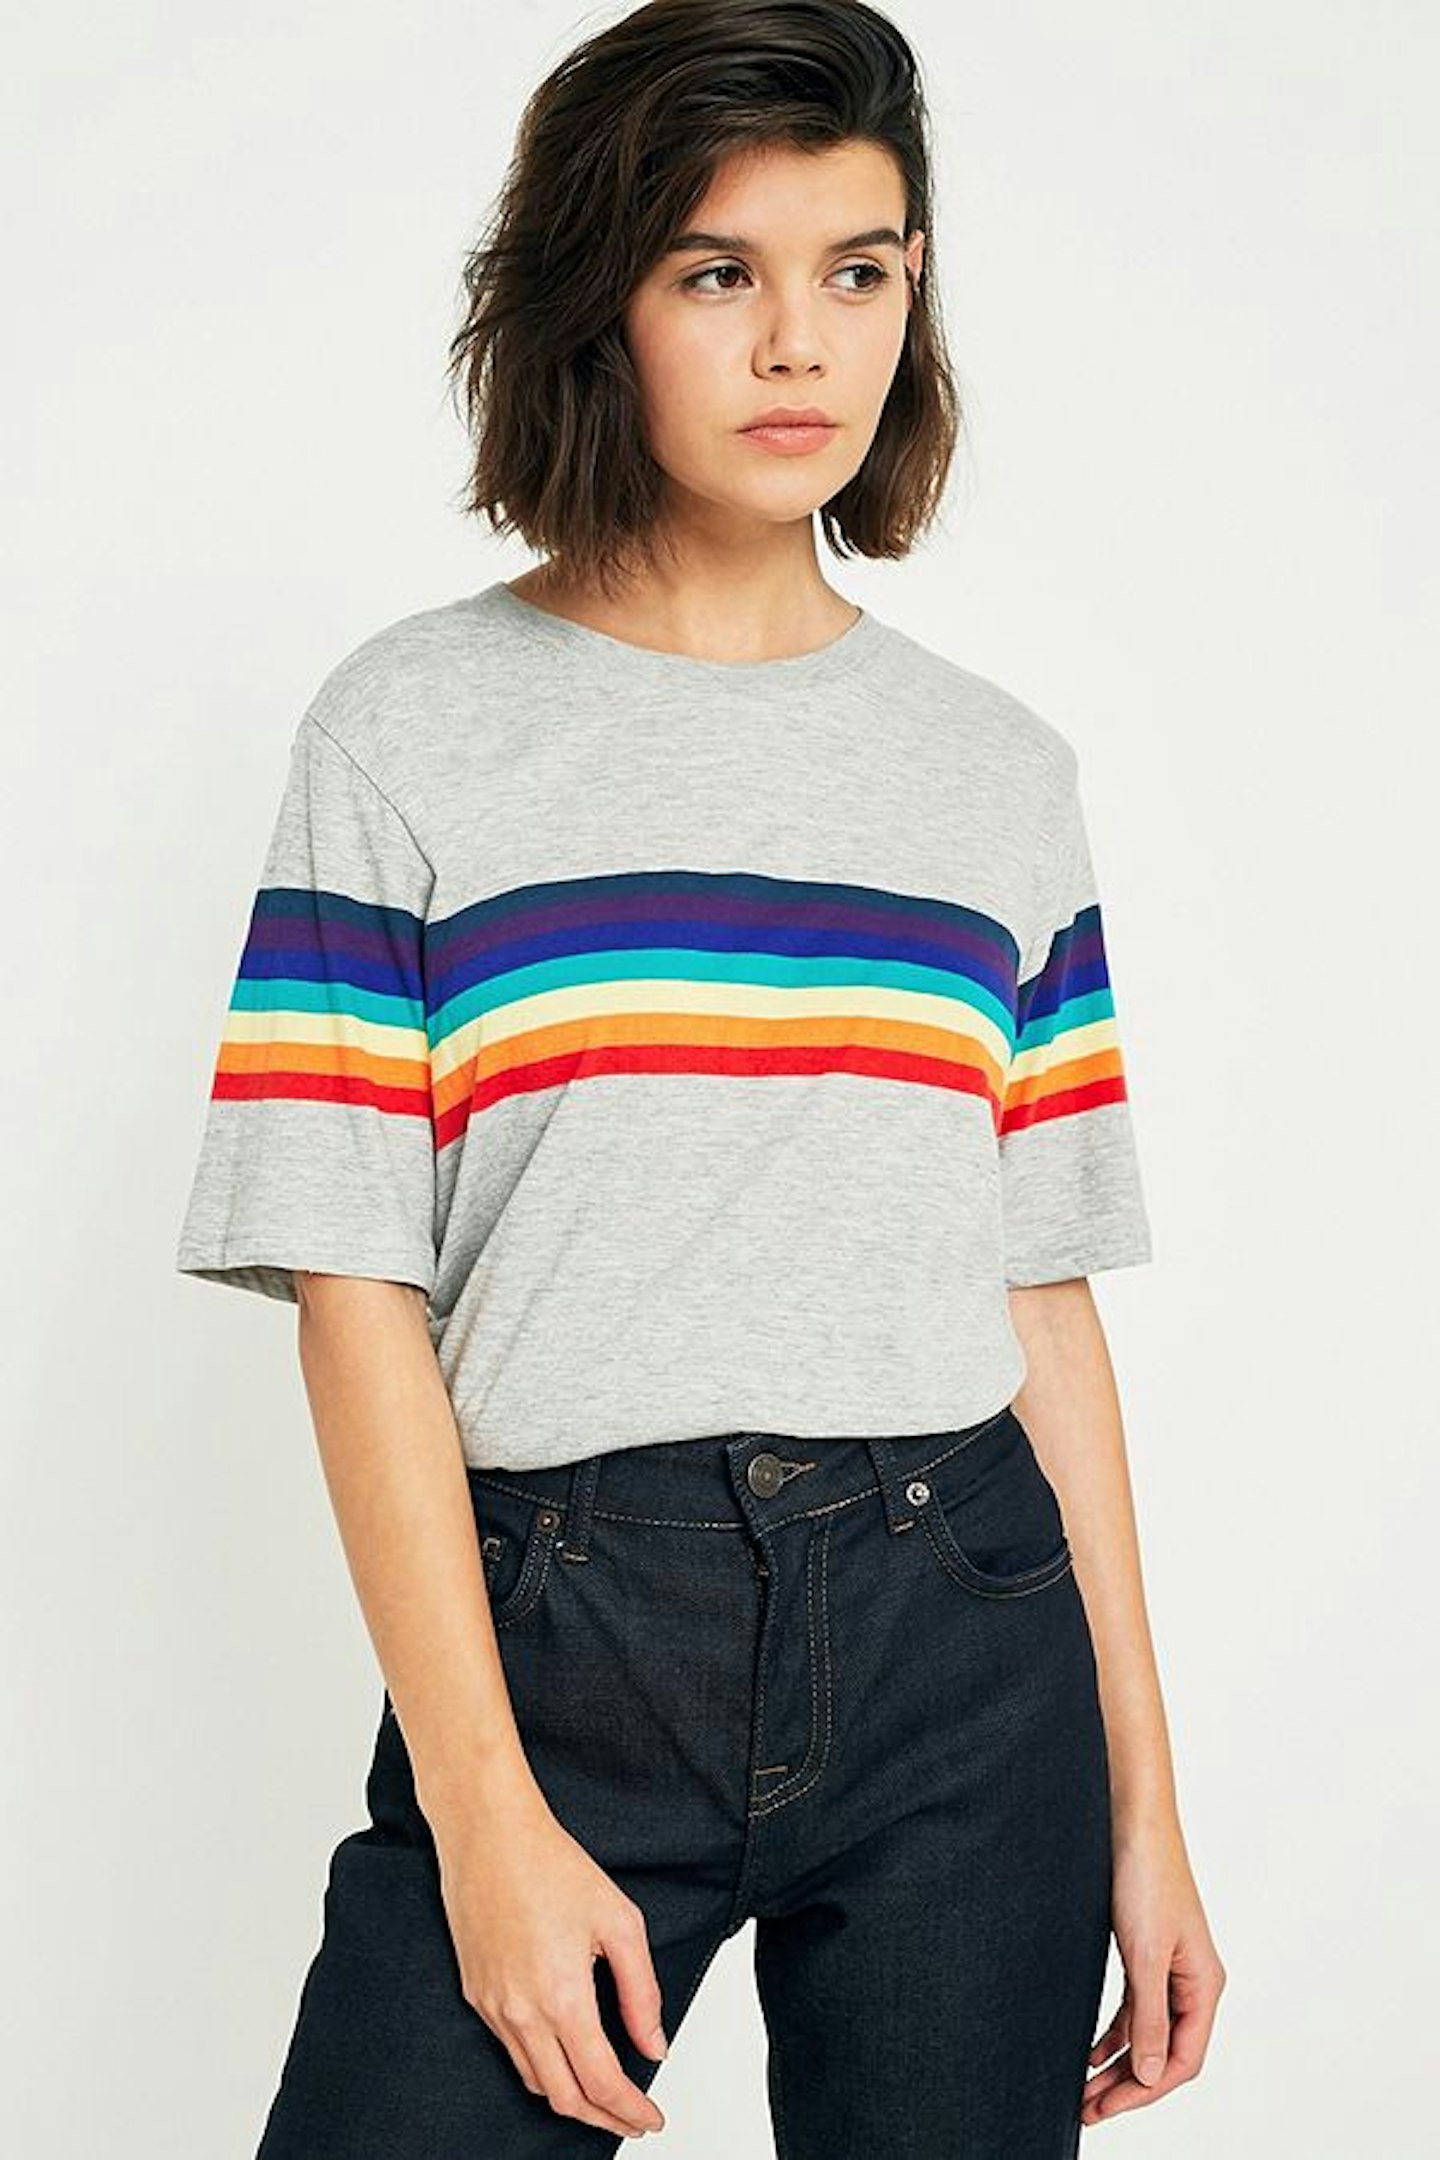 Urban Outfitters Rainbow T-Shirt